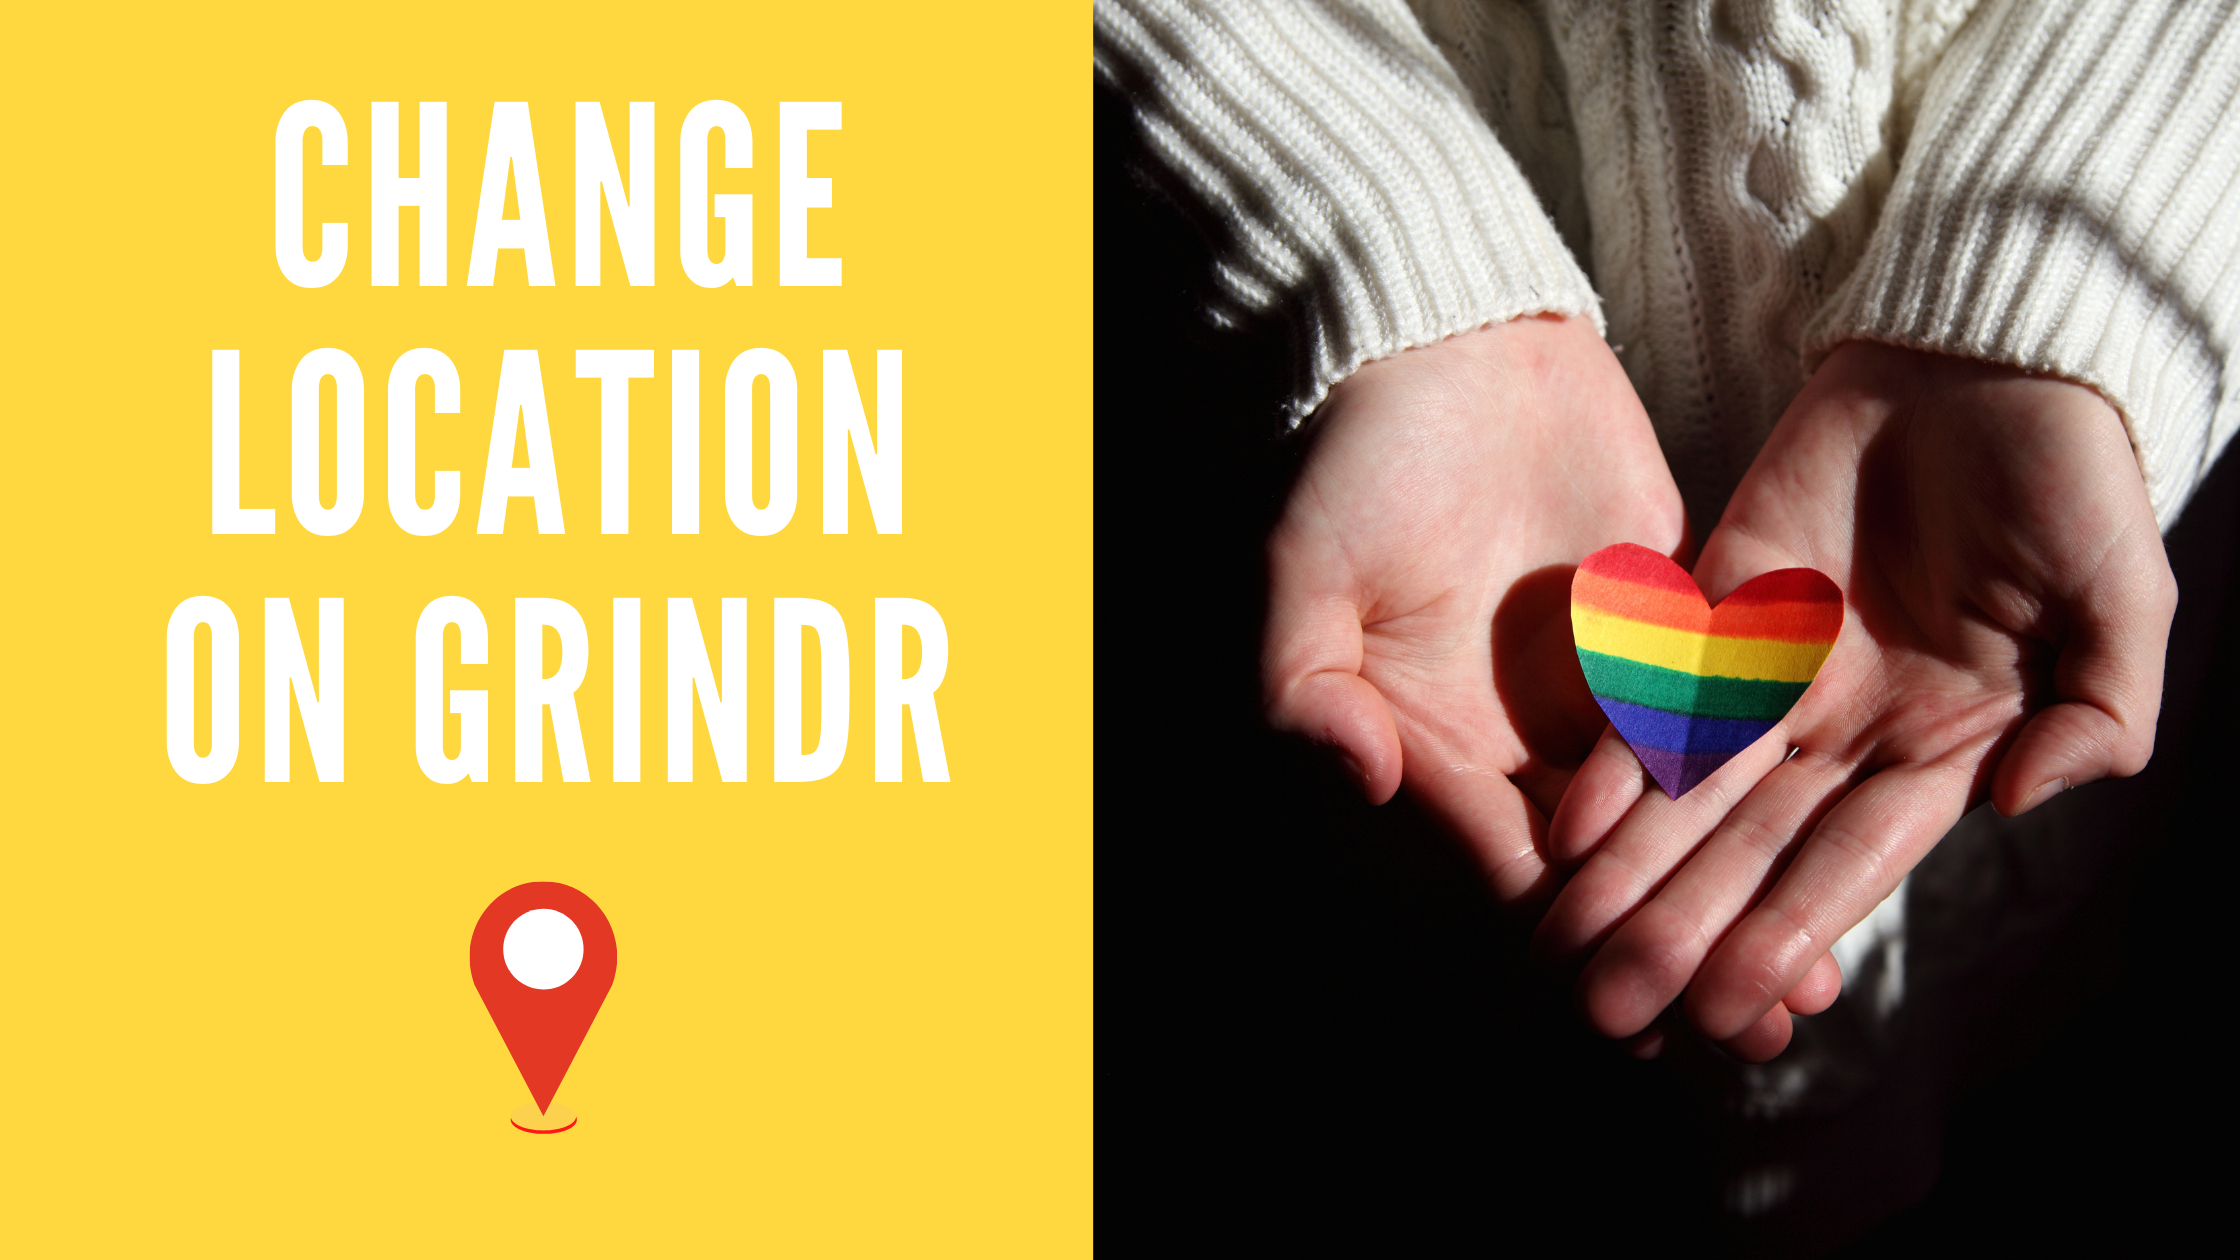 How To Change Location On Grindr